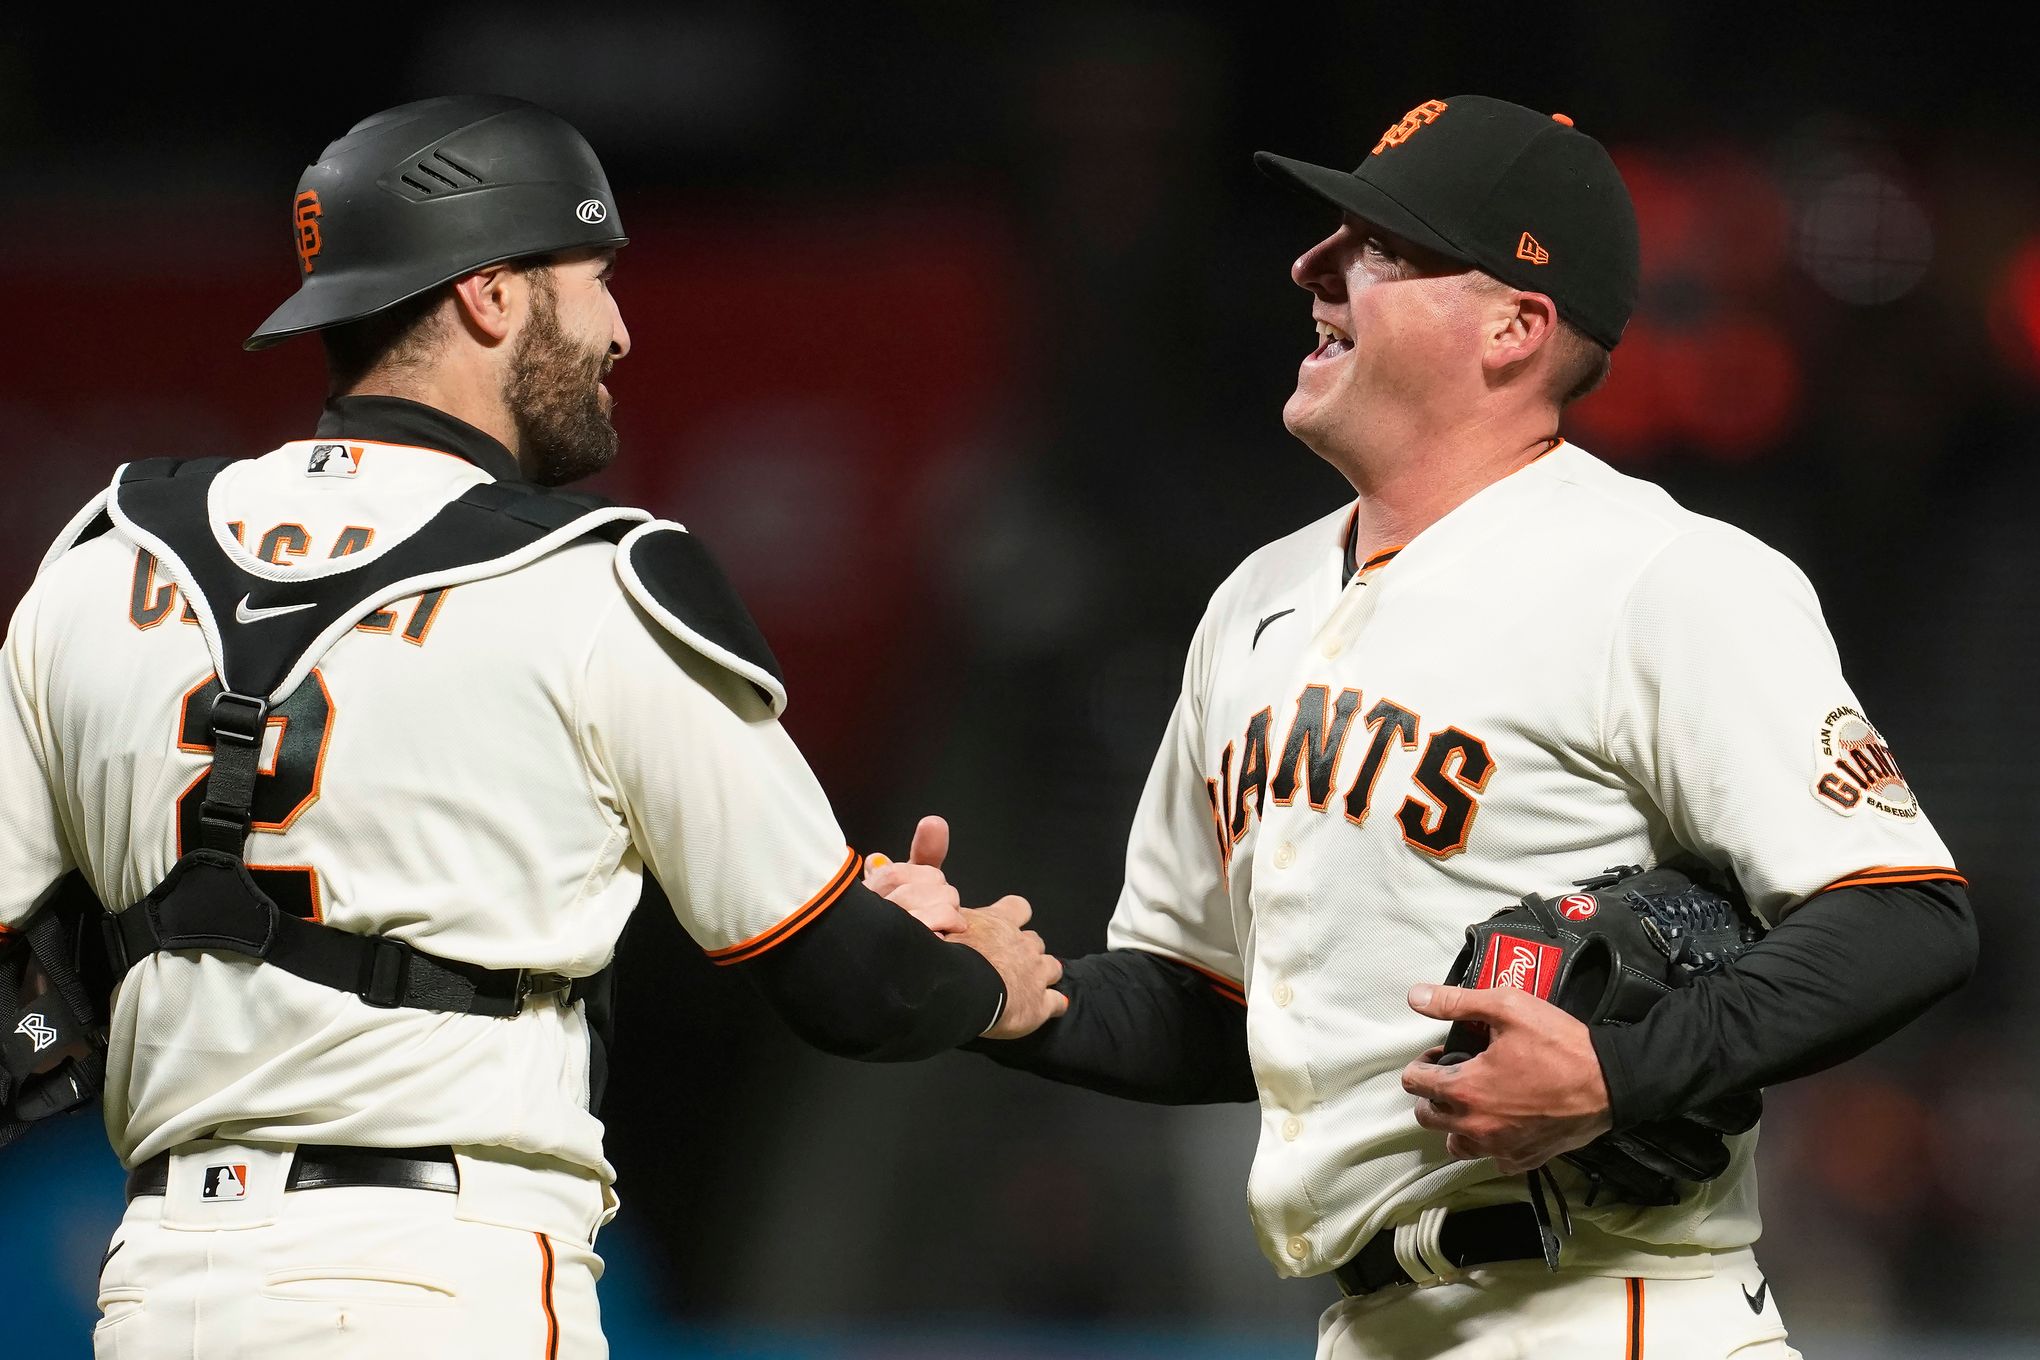 Home sweet home: Brandon Belt staying with San Francisco Giants